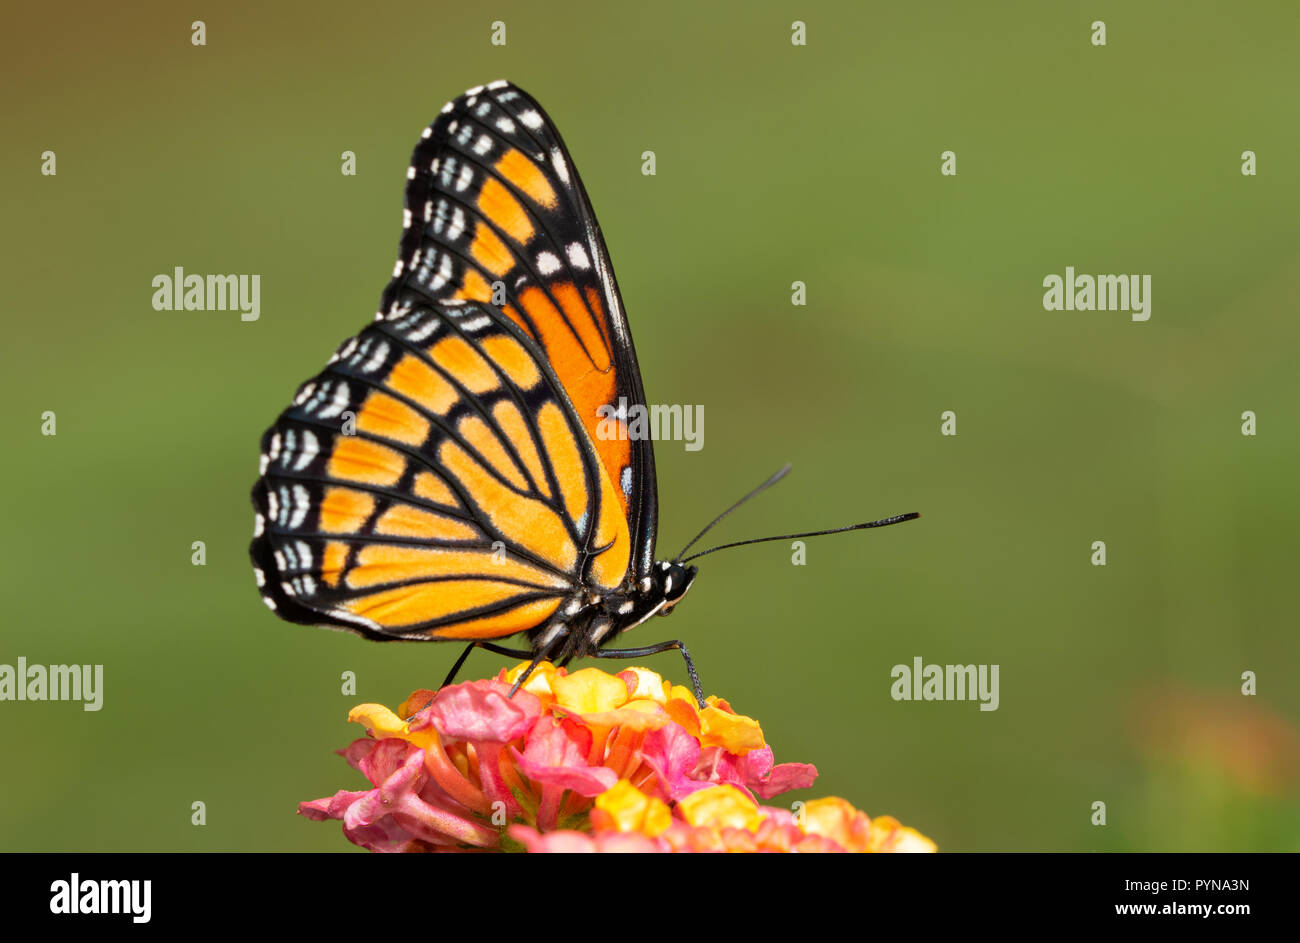 Ventral view of a brilliant Viceroy butterfly on colorful Lantana flower against green background Stock Photo